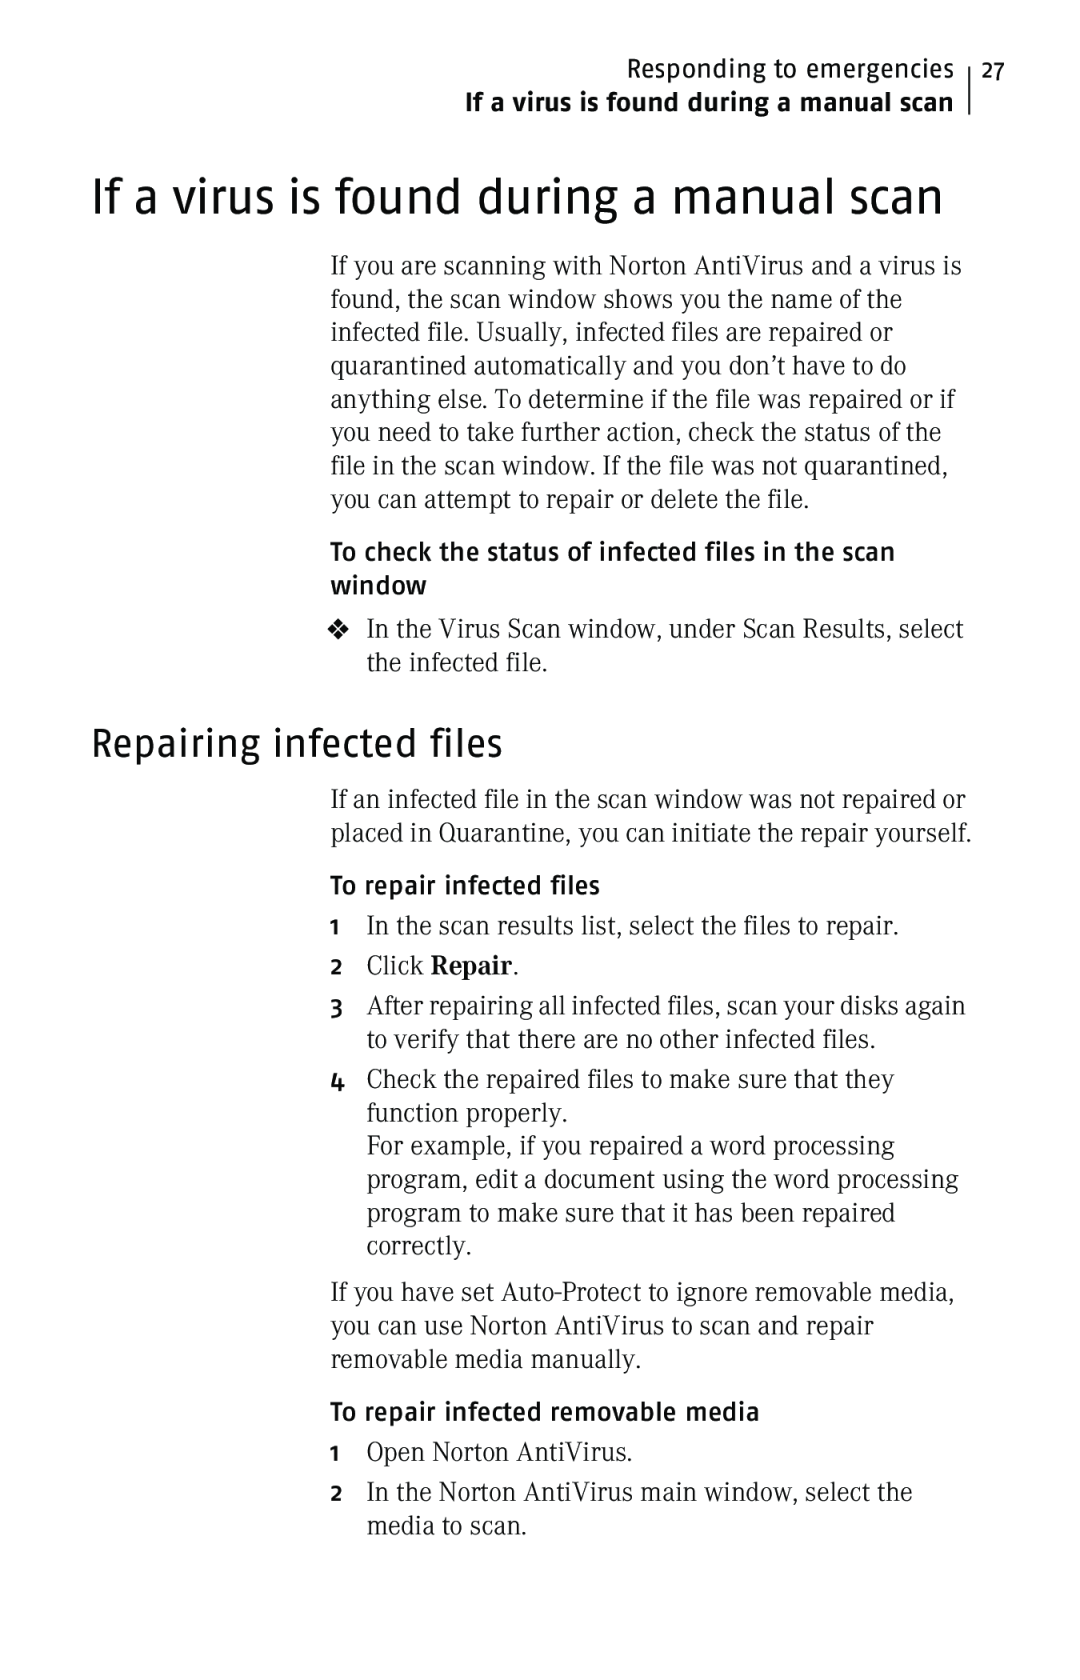 Symantec 10 If a virus is found during a manual scan, Repairing infected files 